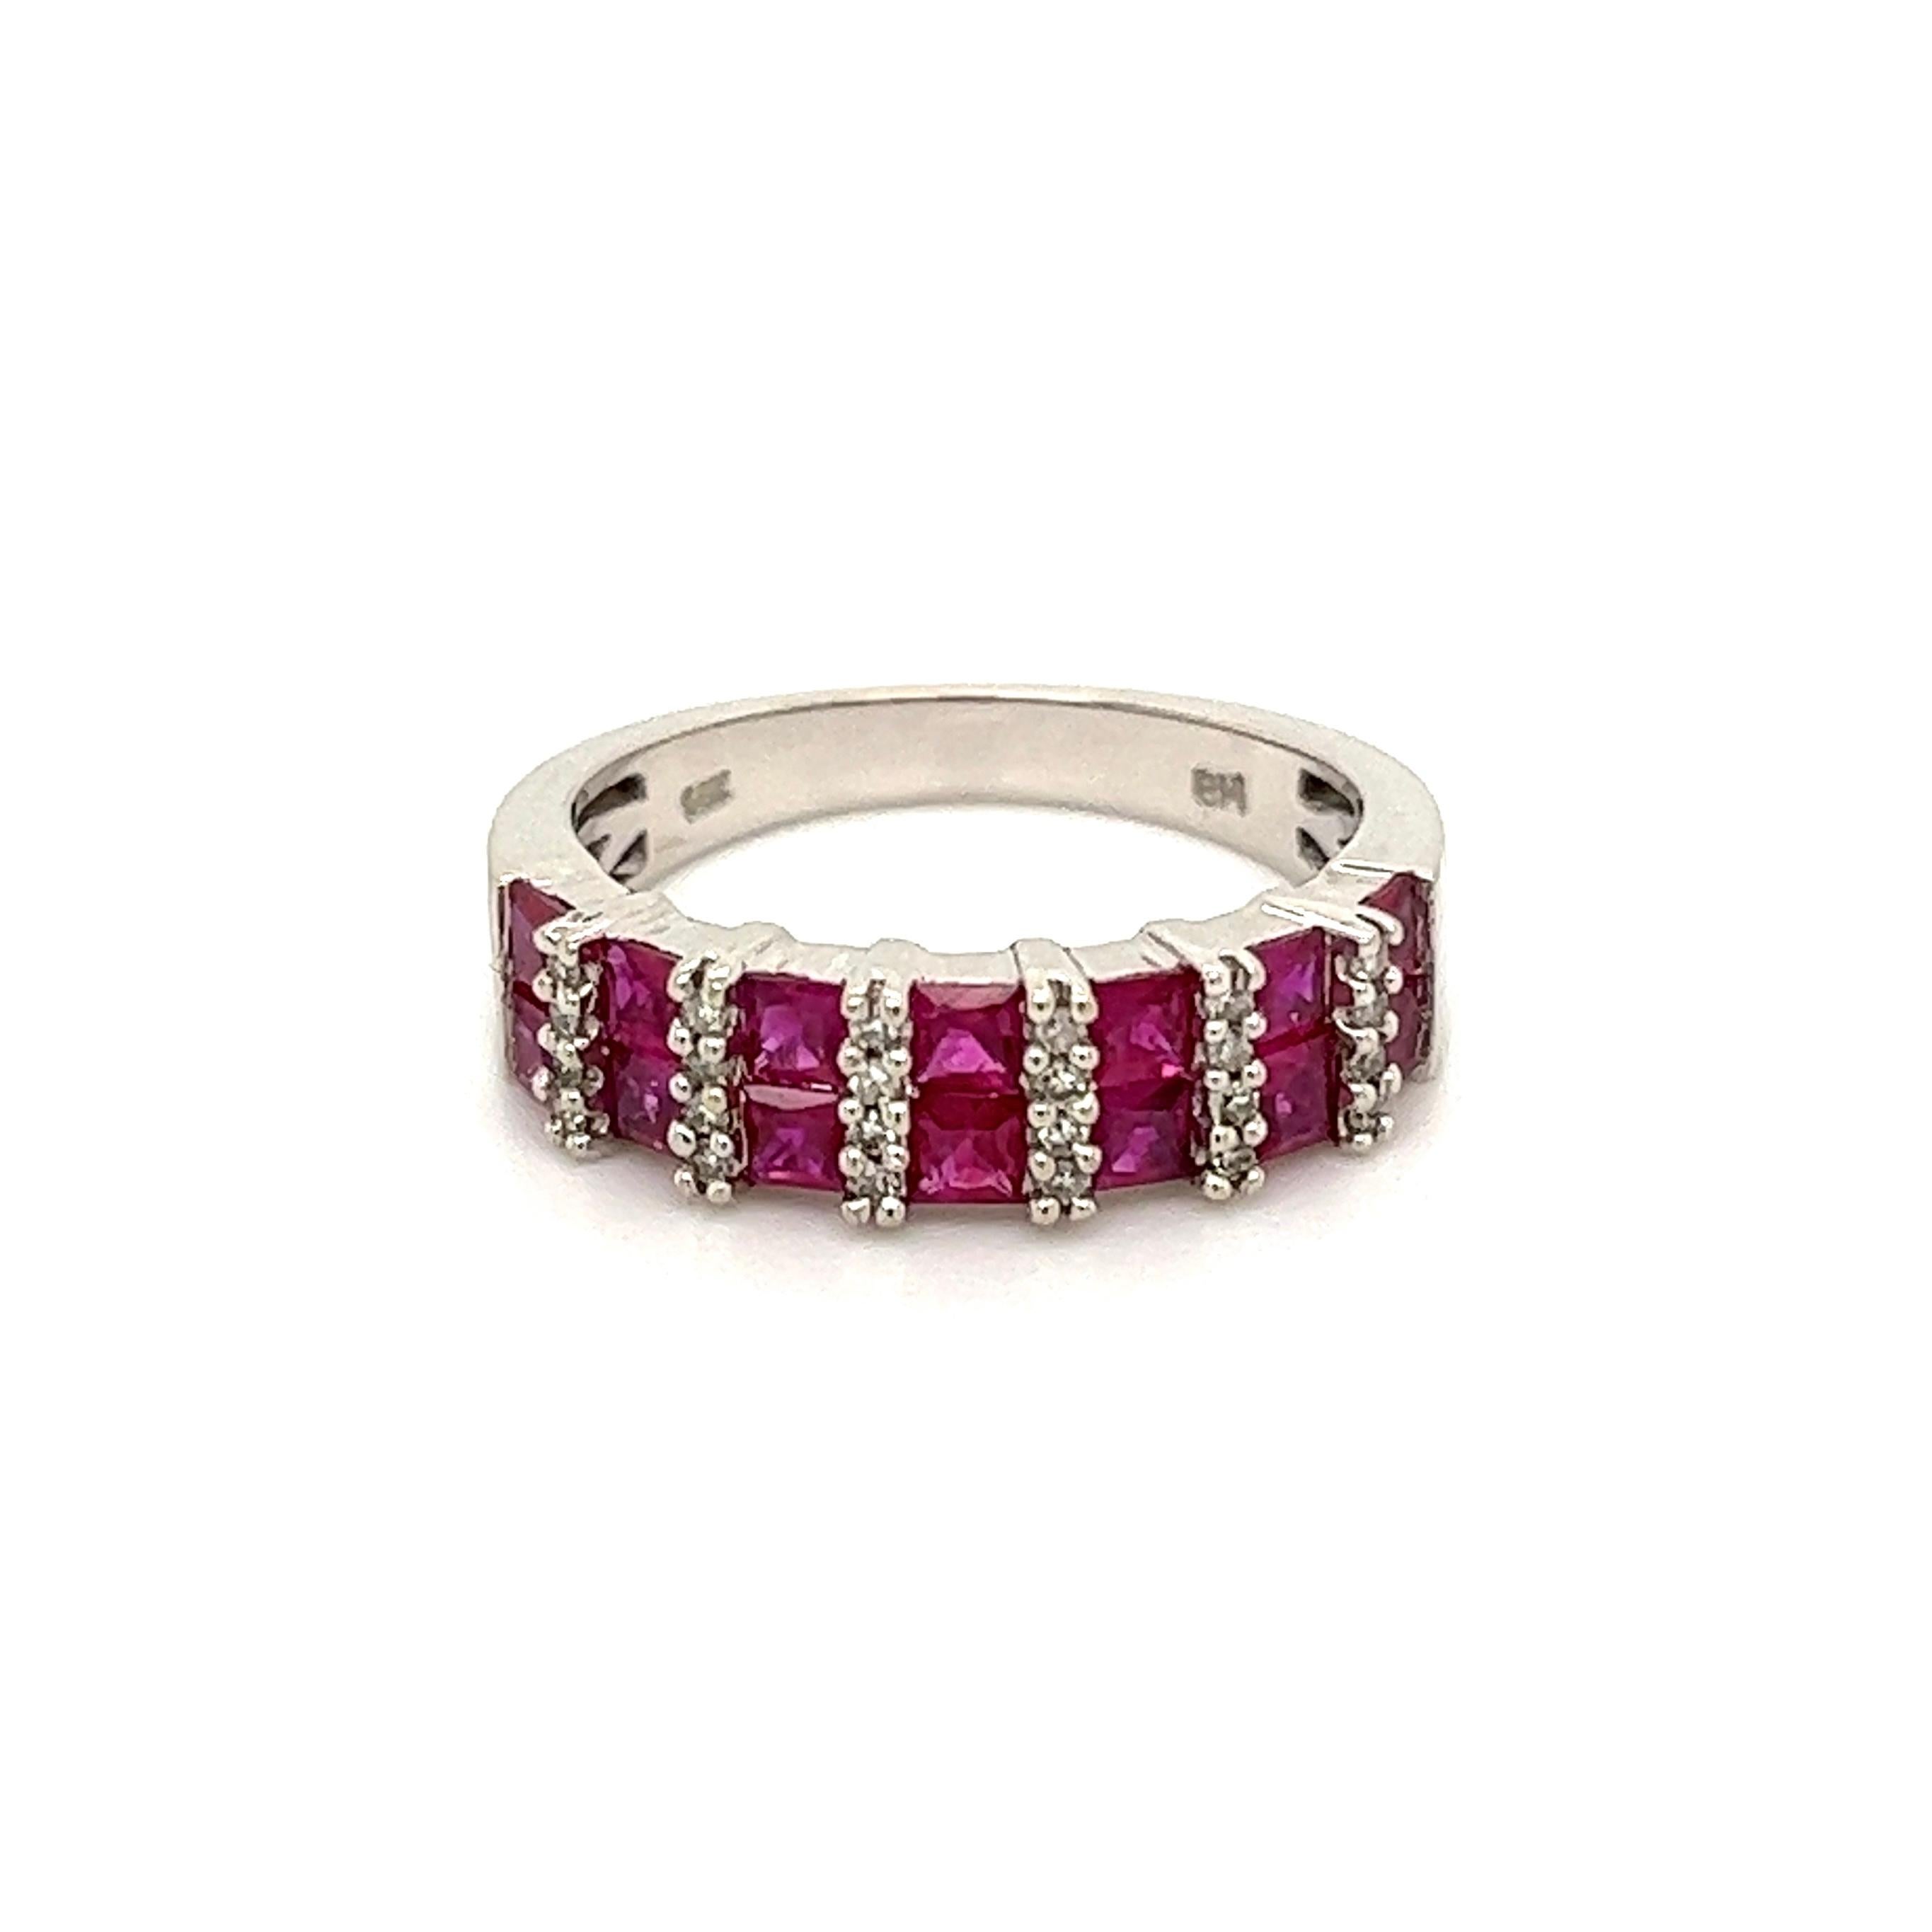 Simply Beautiful! Finely Detailed Double Row Ruby and Diamond Art Deco Revival Half Eternity Gold Band Ring. Hand set with Round Rubies, weighing approx. 1.40tcw, inter-spaced with Diamonds, approx. 0.12tcw. Hand crafted 14K White Gold mounting. The